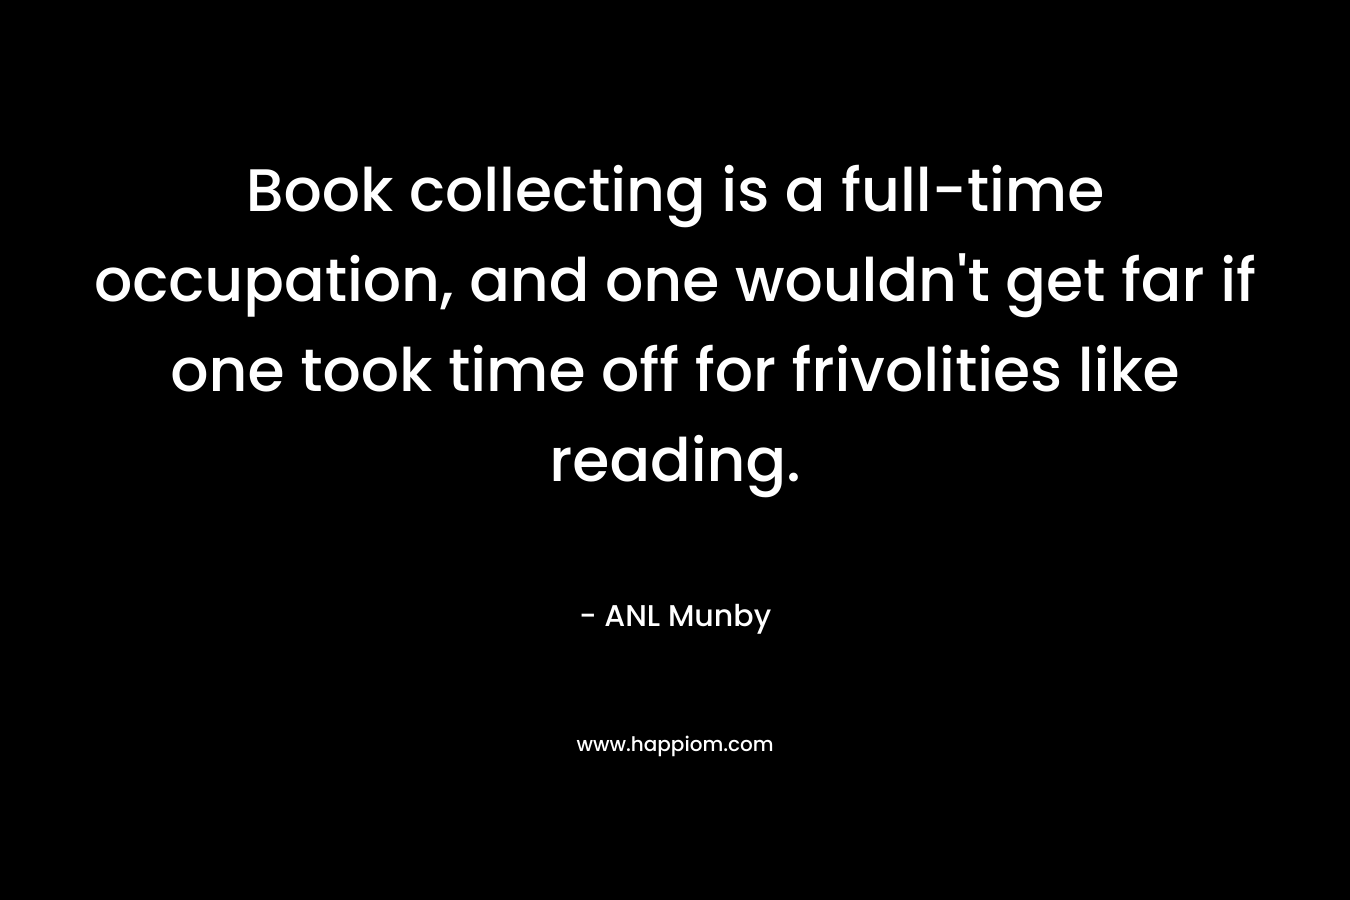 Book collecting is a full-time occupation, and one wouldn't get far if one took time off for frivolities like reading.